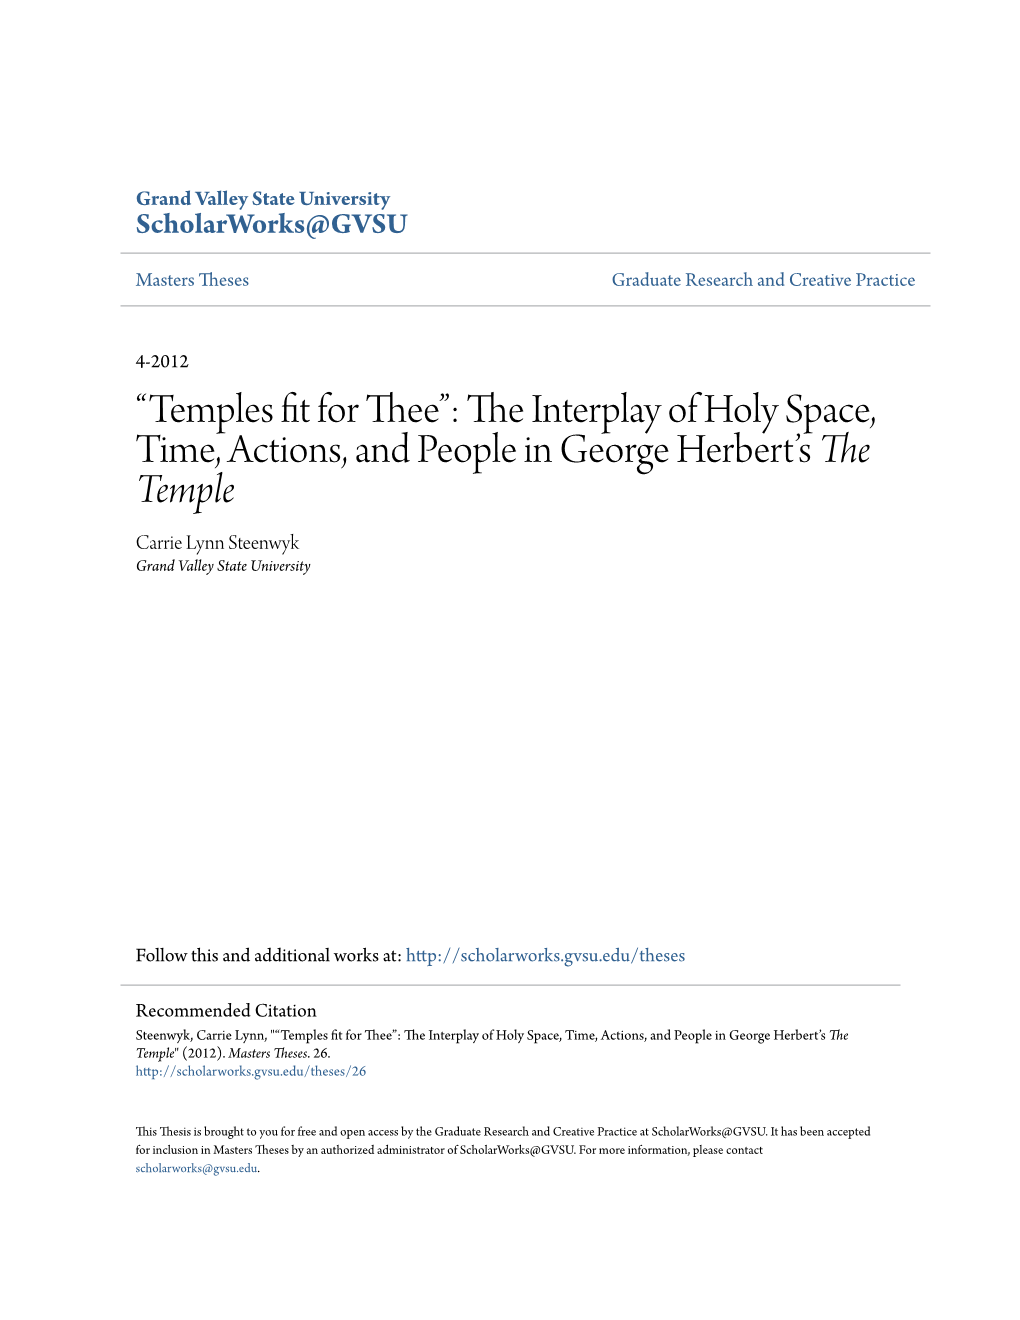 “Temples Fit for Thee”: the Interplay of Holy